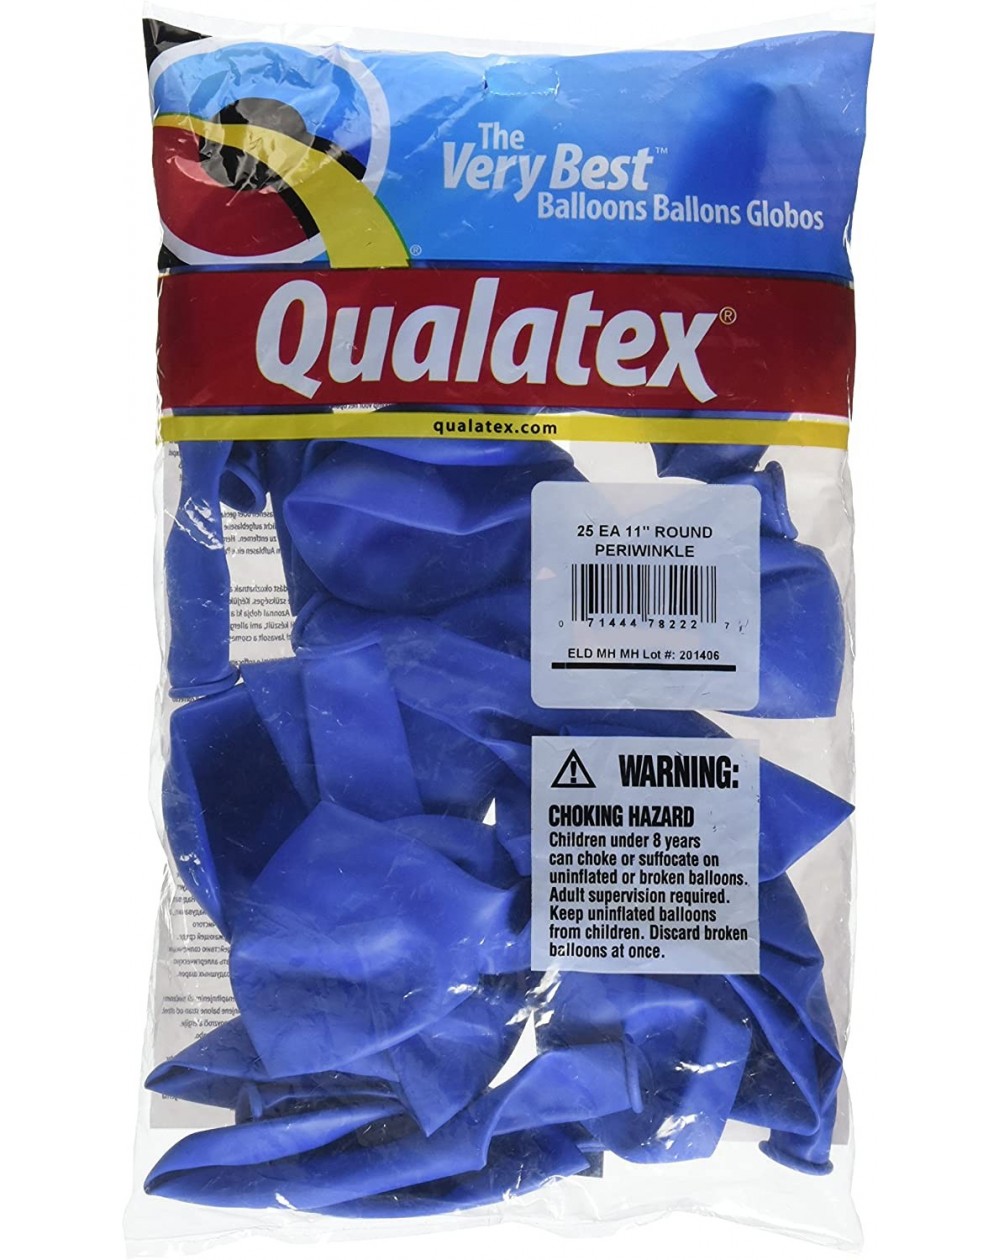 Balloons 25 Count Latex Balloon- 11"- Periwinkle Blue - Periwinkle Blue - C211YI5V6B7 $9.62